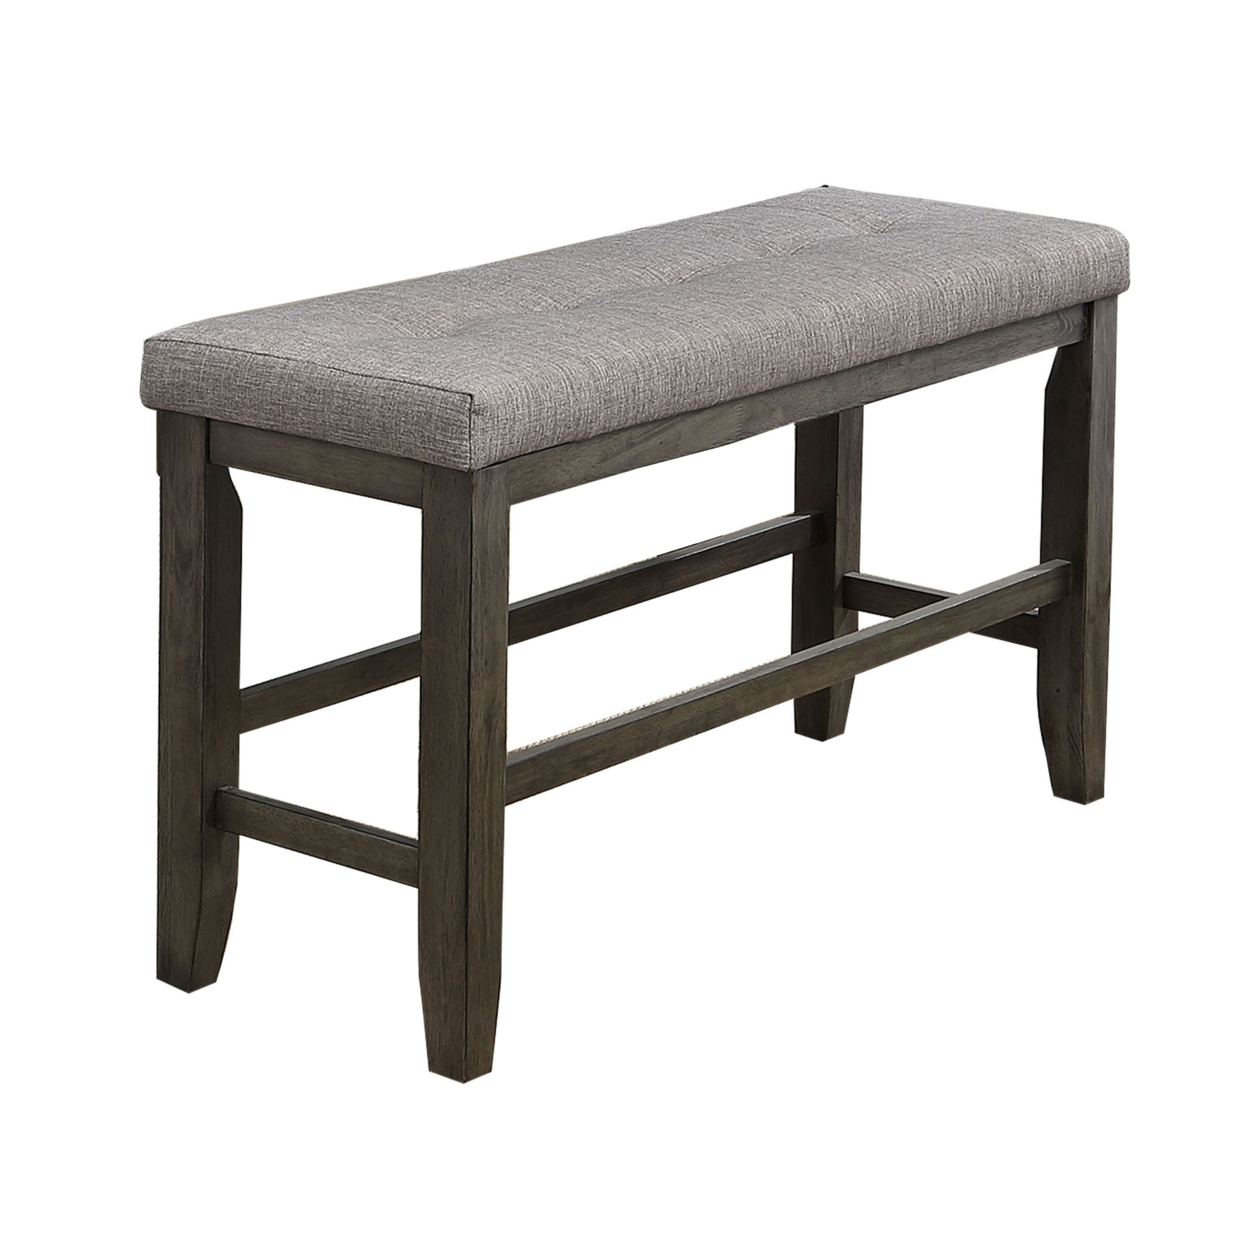 Wooden Counter Height Bench With Fabric Upholstered Seat, Brown And Gray- Saltoro Sherpi